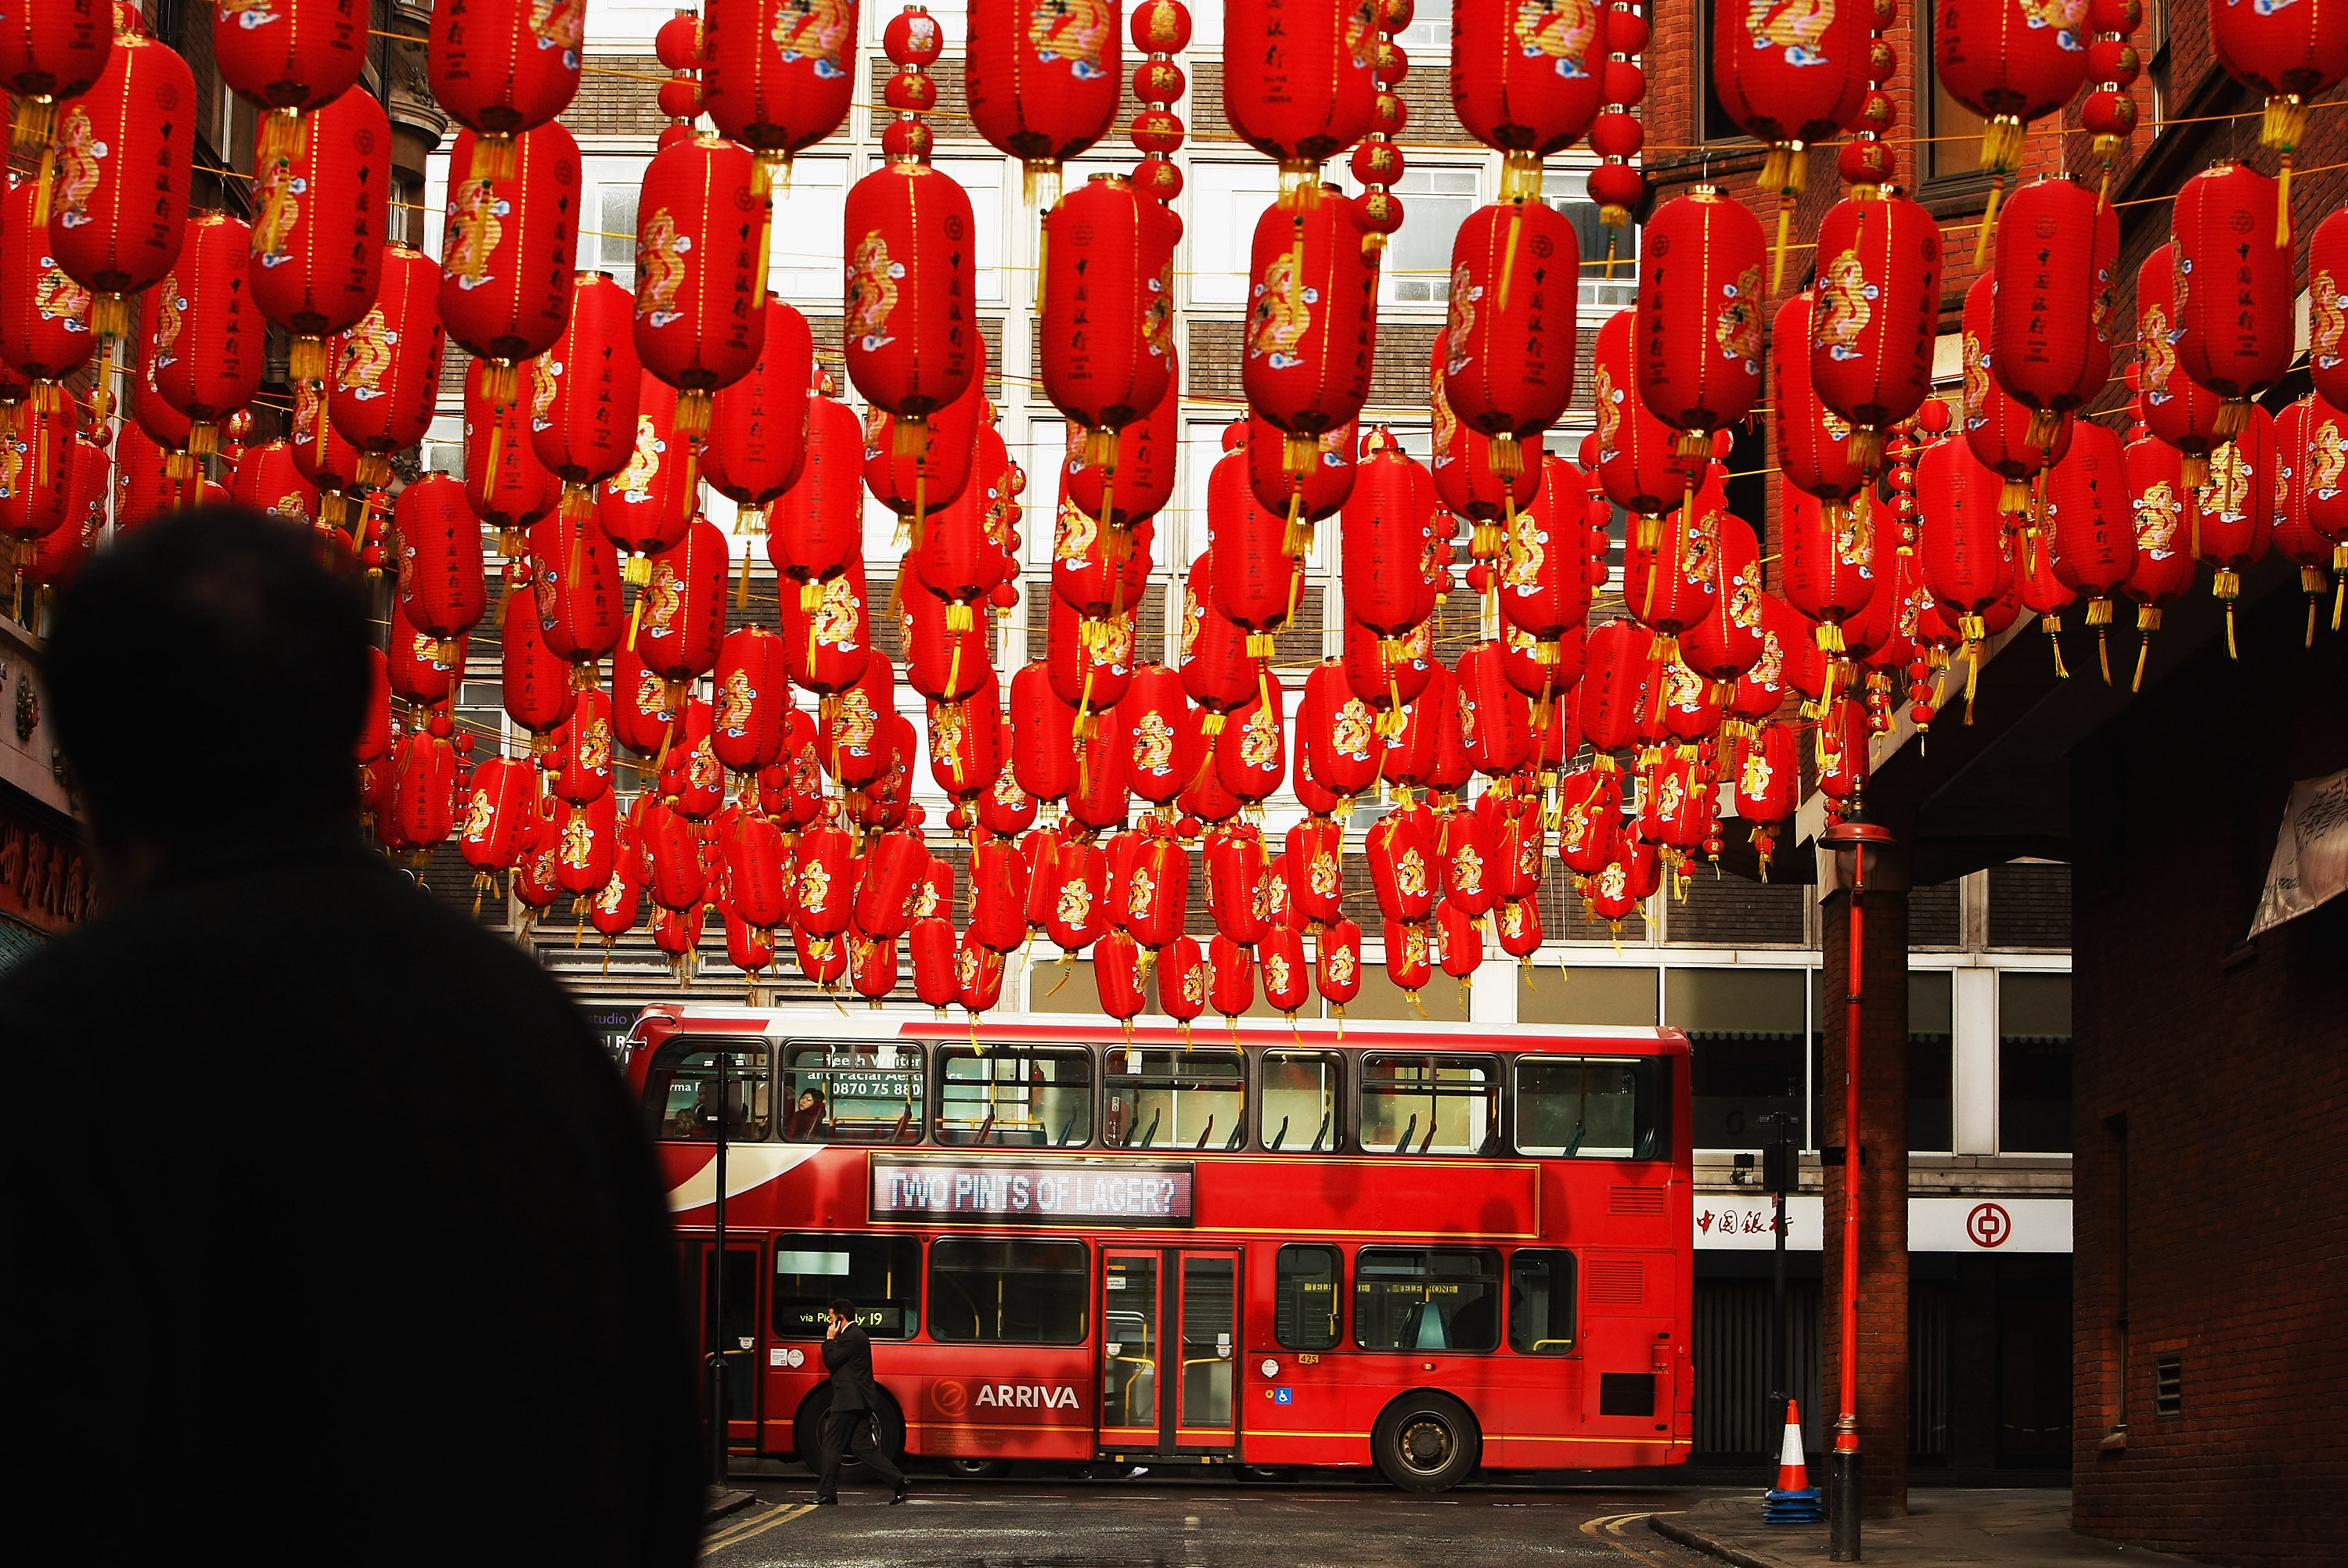 A bus passes the entrance to Chinatown in London. Although Hongkongers tend to travel frequently, a few trips overseas as a tourist are not the same as being a resident. Photo: Getty Images